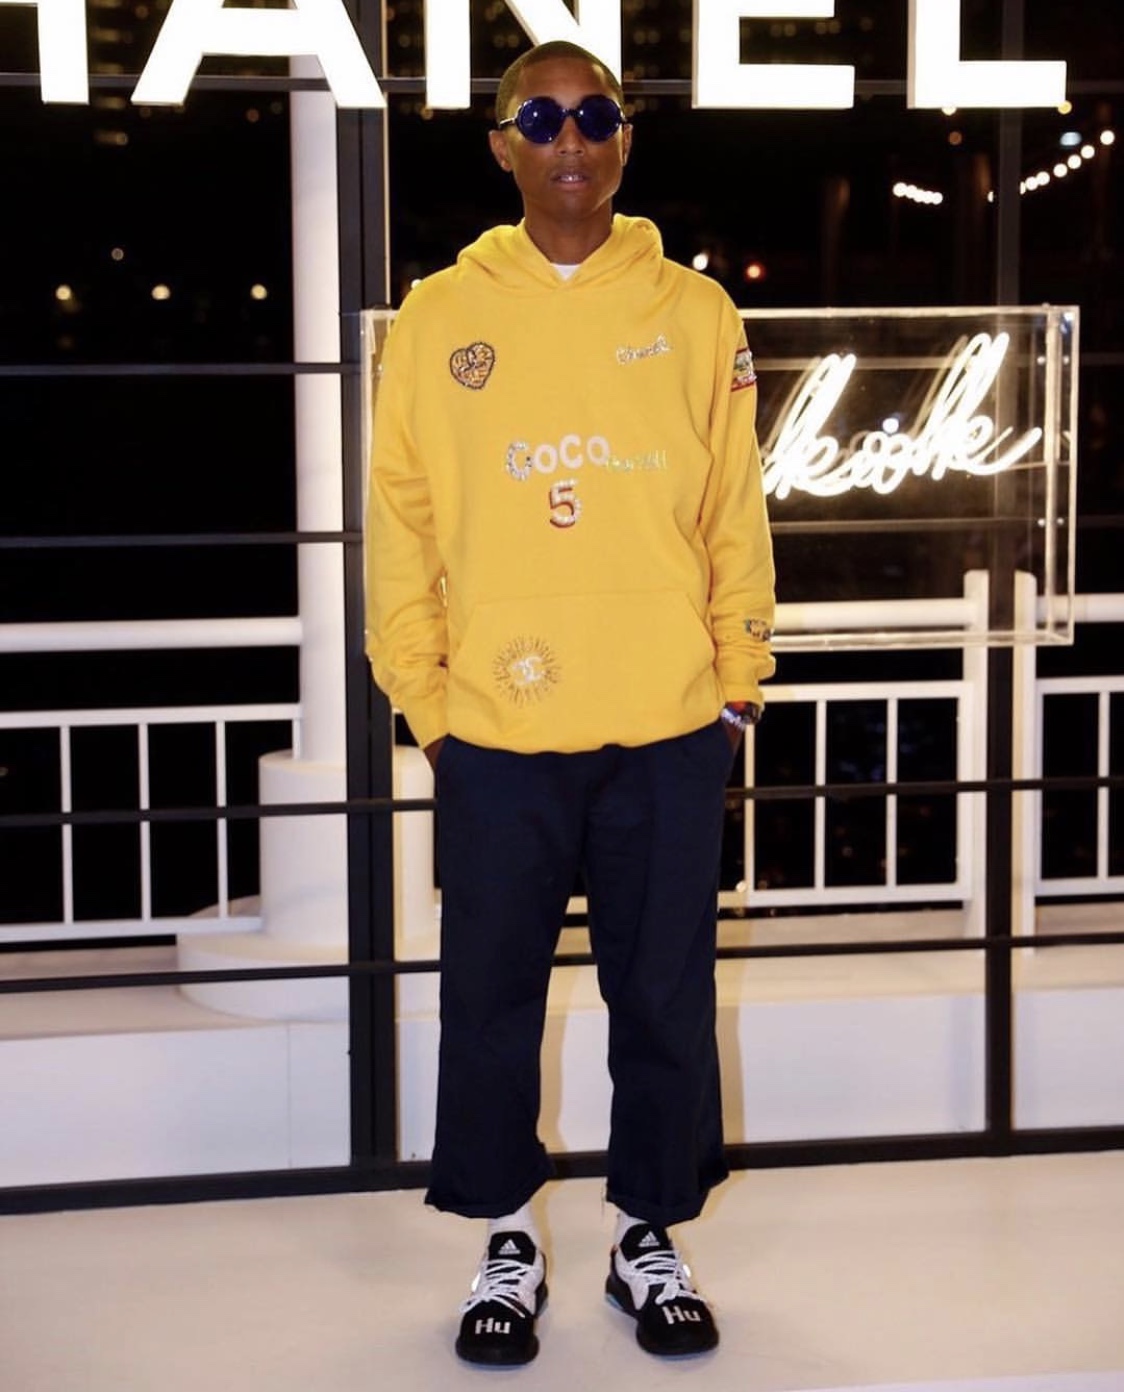 SALE／96%OFF】 19SS Chanel x Pharrell Capsule Collection yellow